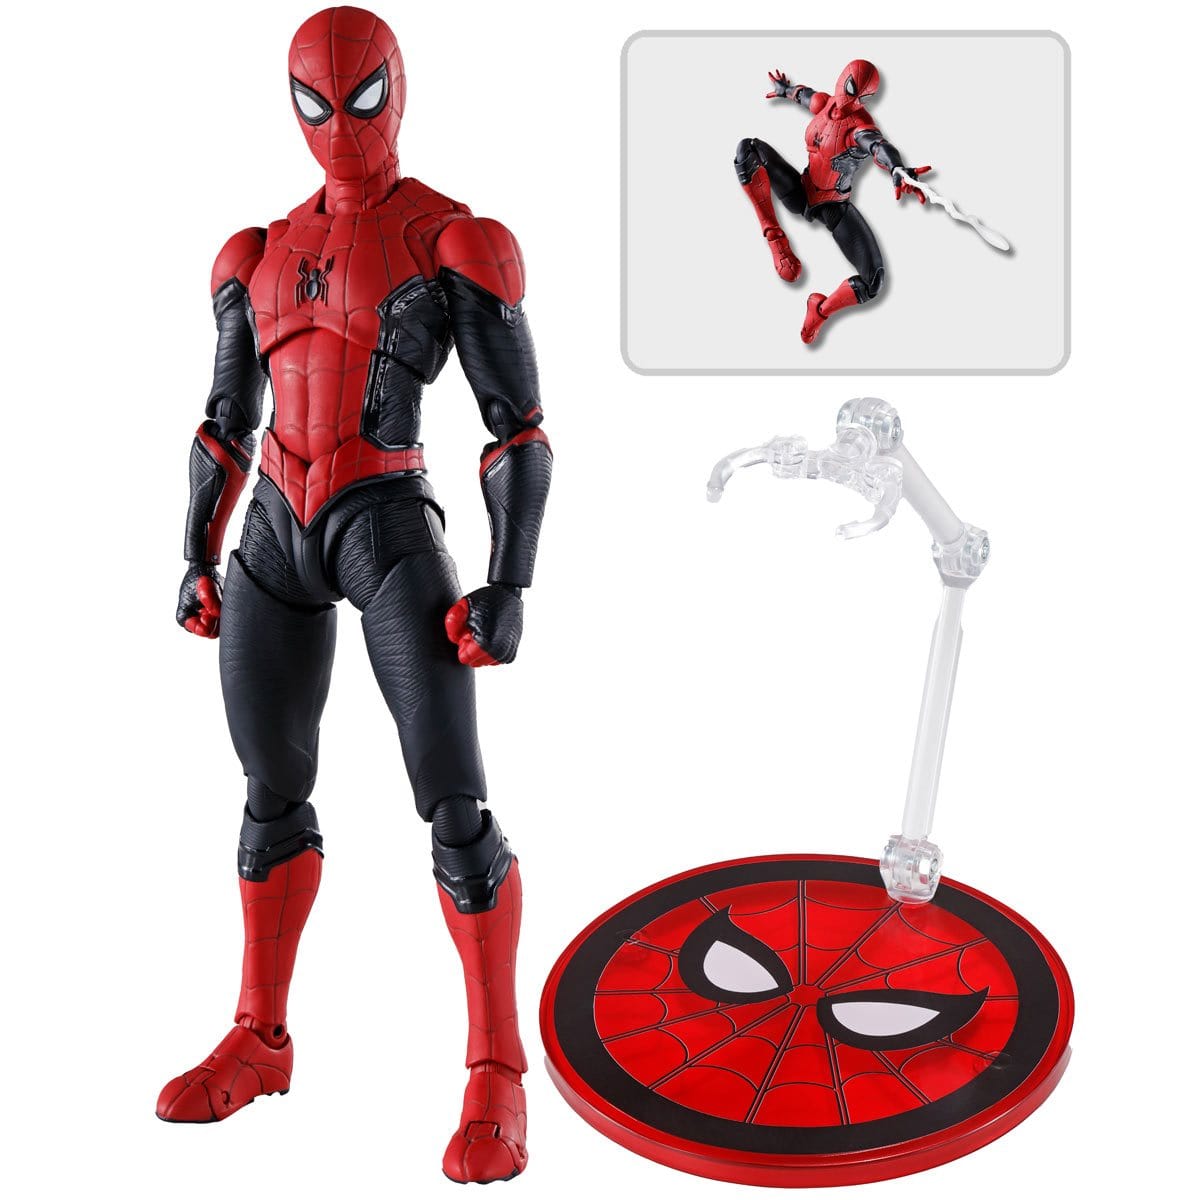 Spider-Man: No Way Home Spider-Man Upgraded Suit S.H.Figuarts Action Figure Media 1 of 8